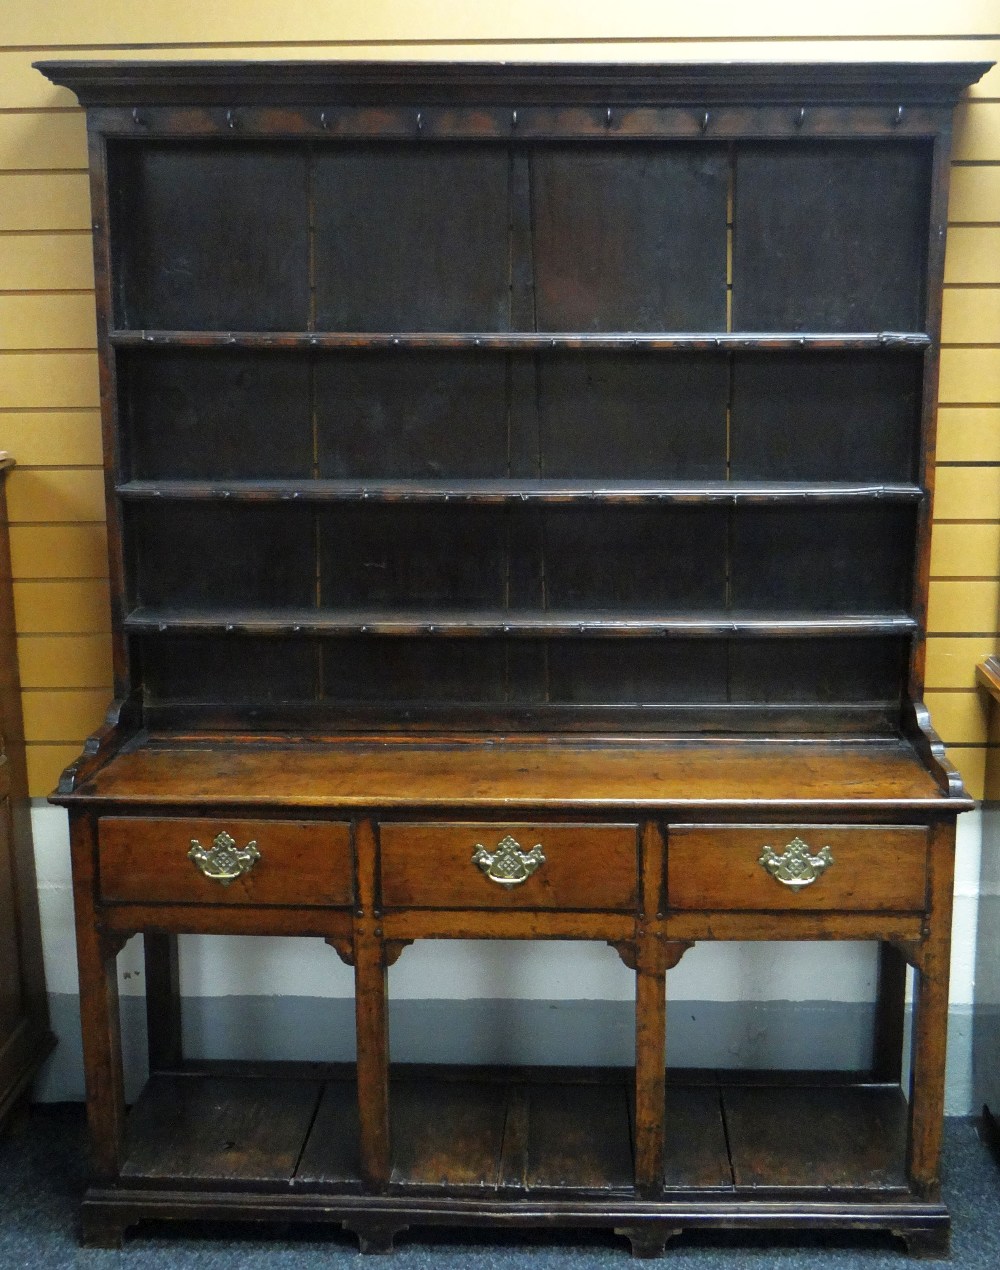 A SMALL NINETEENTH CENTURY WEST WALES OAK DRESSER having a base of three drawers, with brass handles